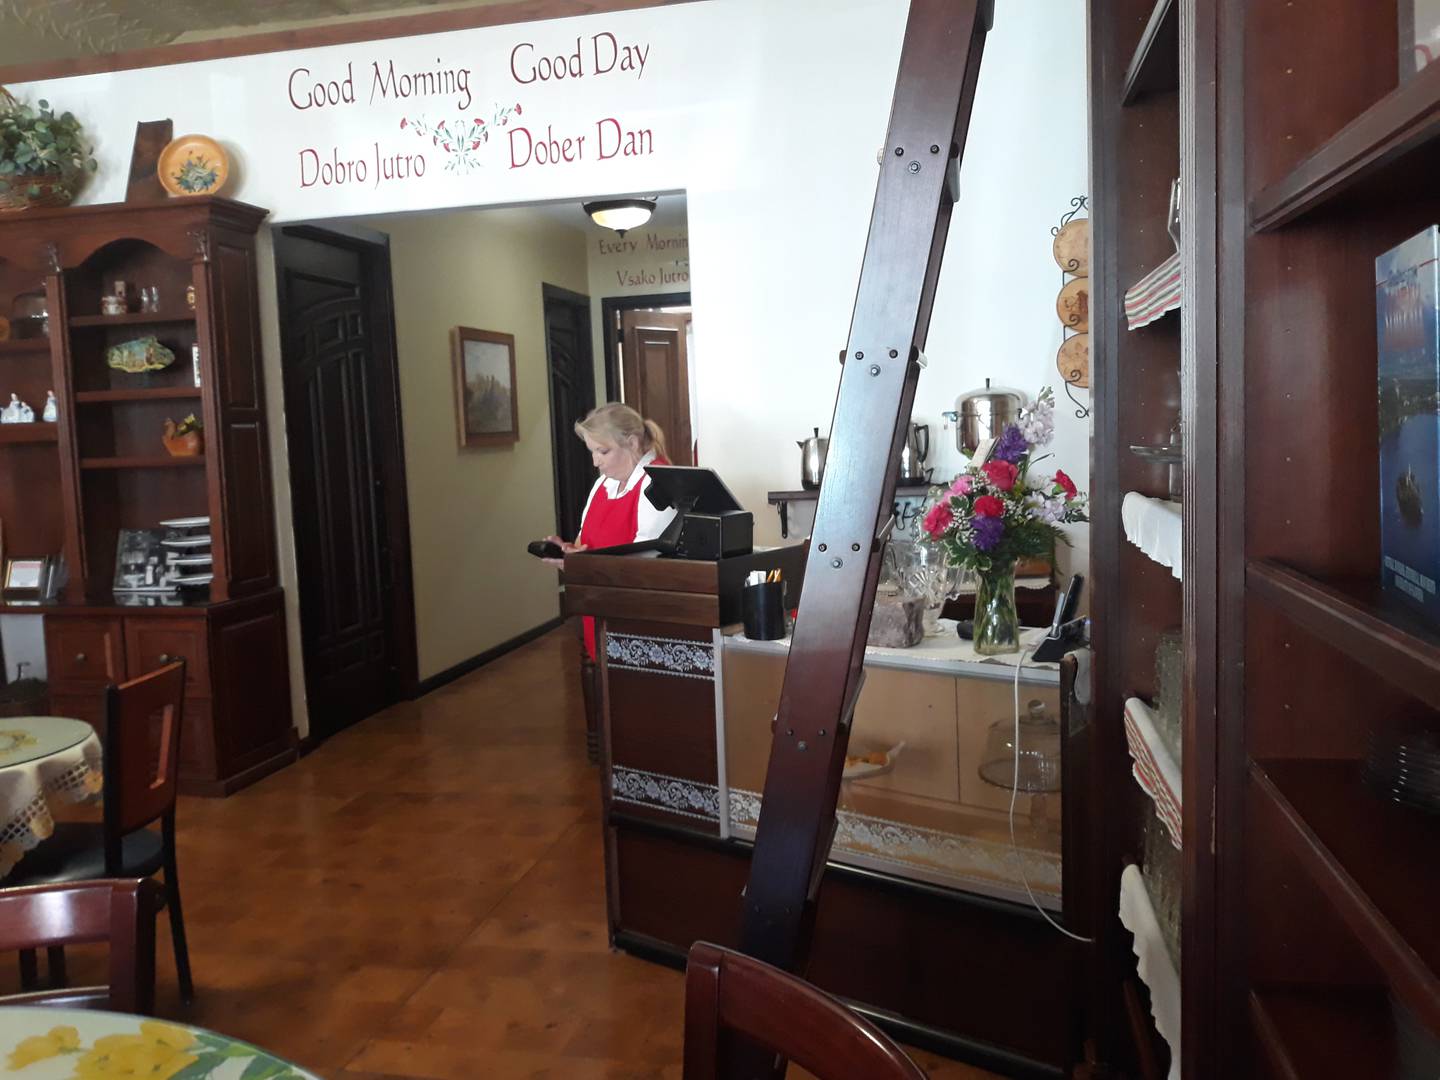 A hostess gets ready to serve a table Friday, June 17, 2022, at the Good Morning Good Day restaurant in downtown Streator.